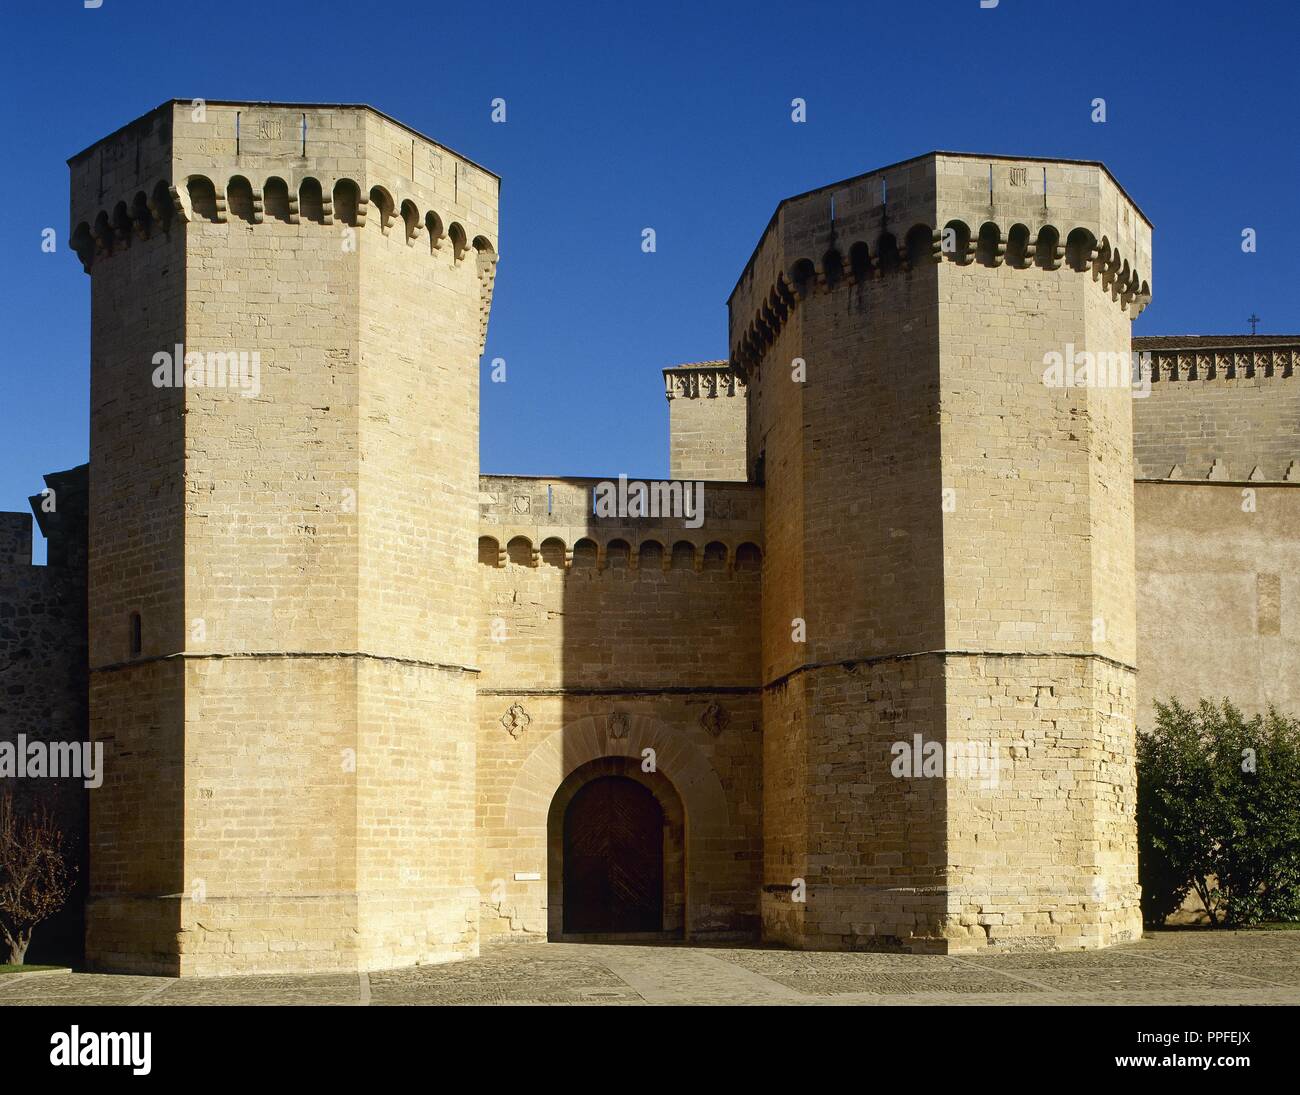 Spain, Catalonia, Tarragona province, Vimbodi. The Royal Abbey of Santa Maria de Poblet, a Cistercian monastery. Royal Gate, whose construction was ordered by Peter III el Ceremonios (Peter The Ceremonious, 1319-1387). Gothic style flanked by two octogonal towers. Stock Photo